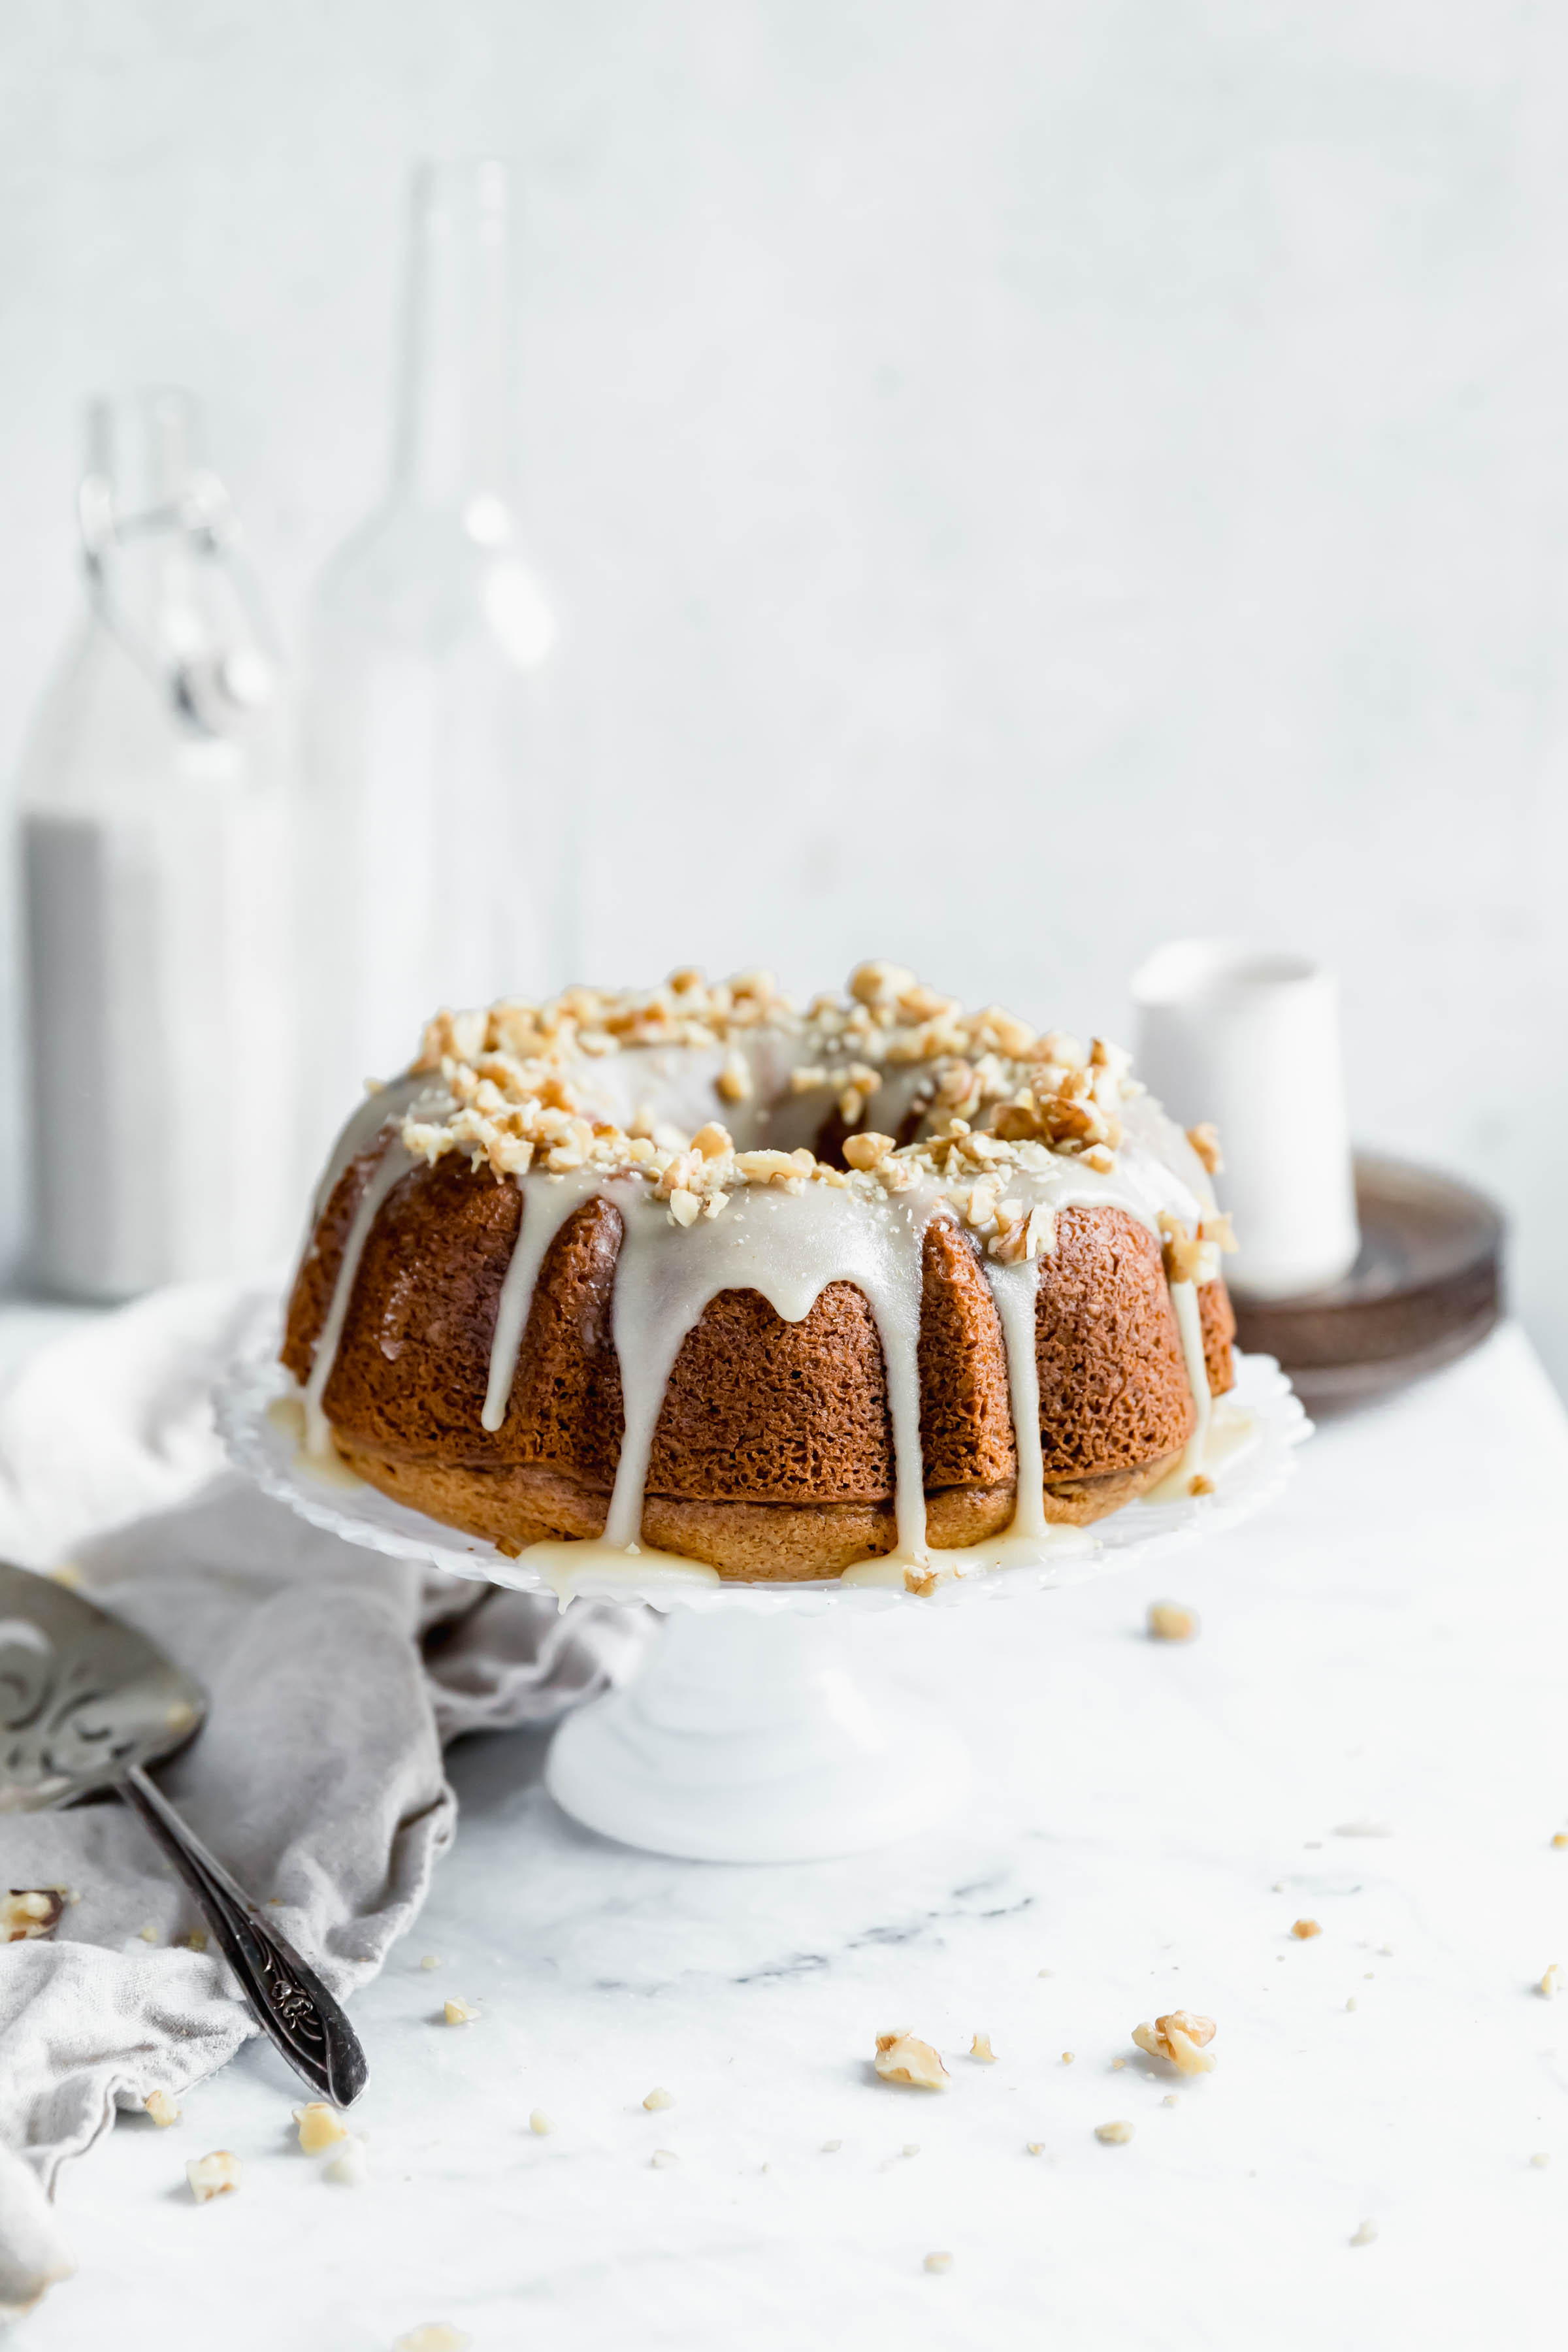 This maple sweet potato bundt cake has the silkiest, dreamiest crumb. Perfect for this Holiday season and great for a crowd!